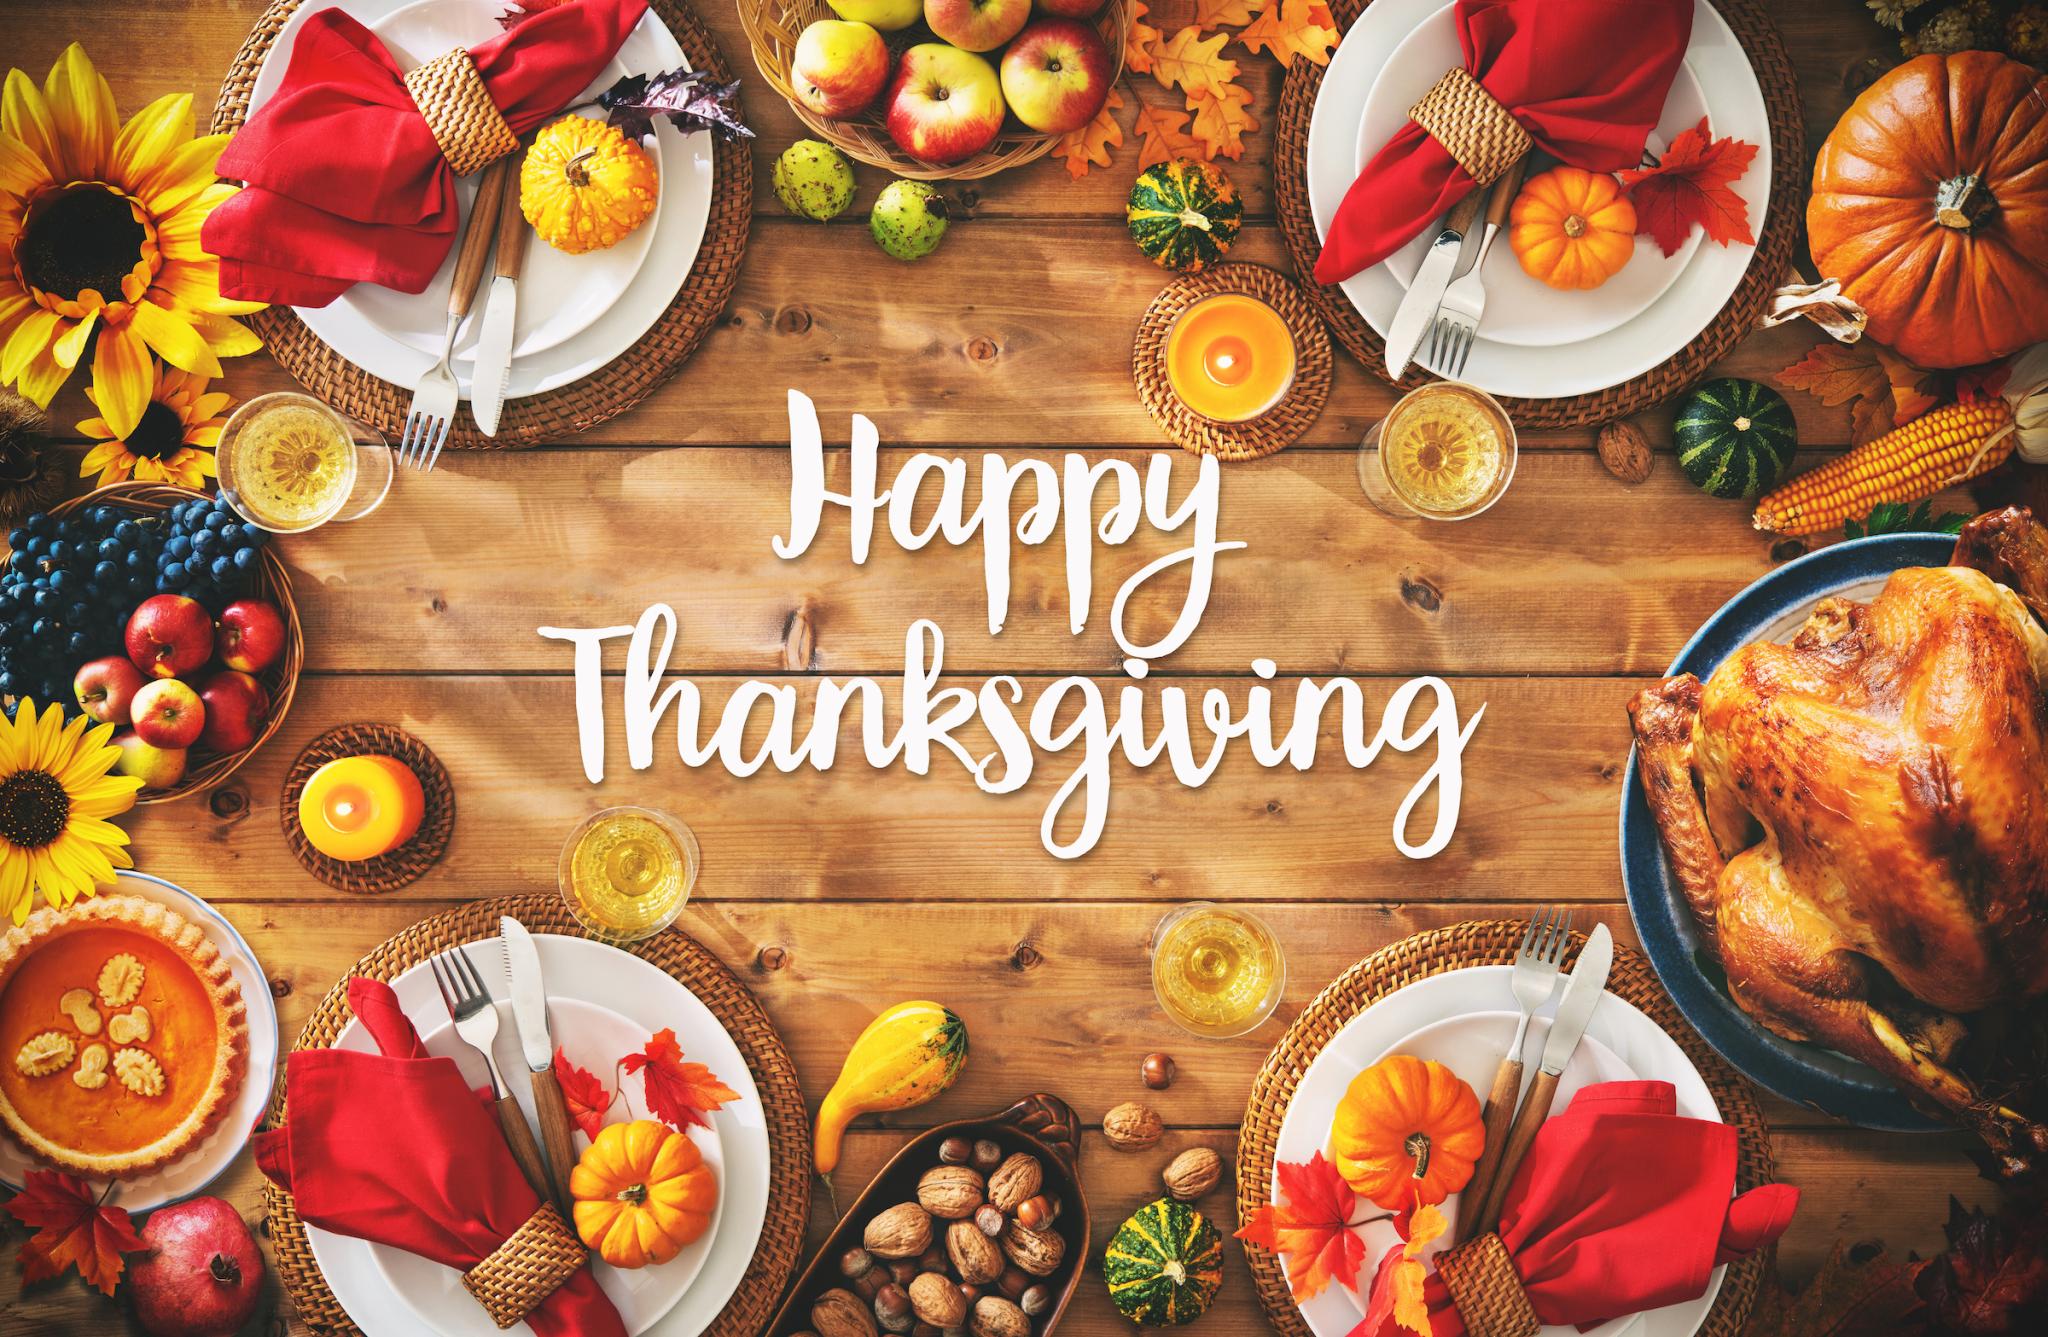 Happy Thanksgiving image with a feast and a table setting